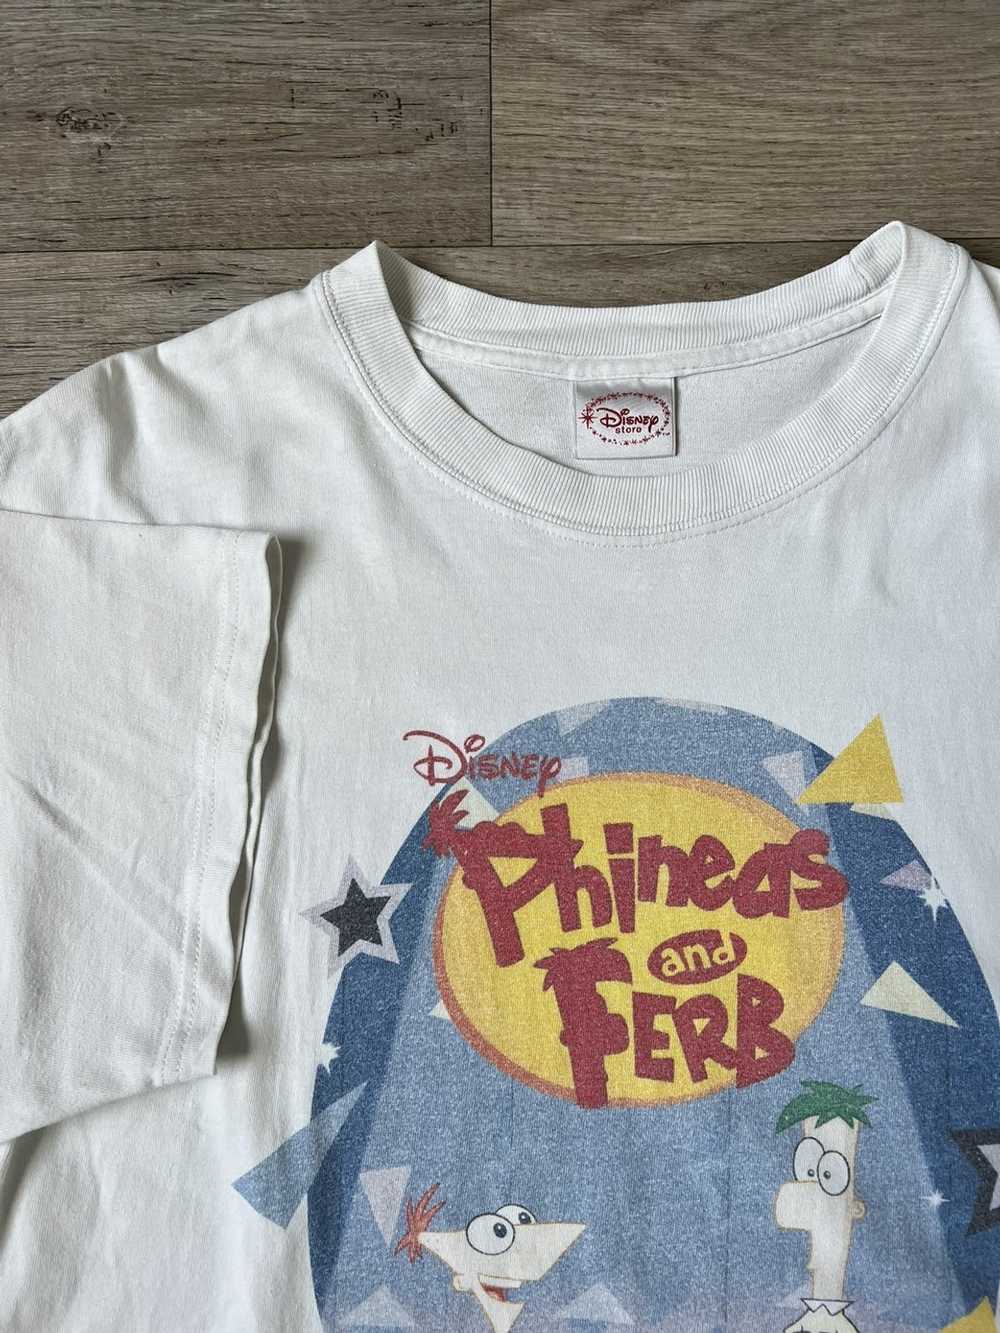 Disney Y2K Disney store phineas and Ferb shirt - image 2